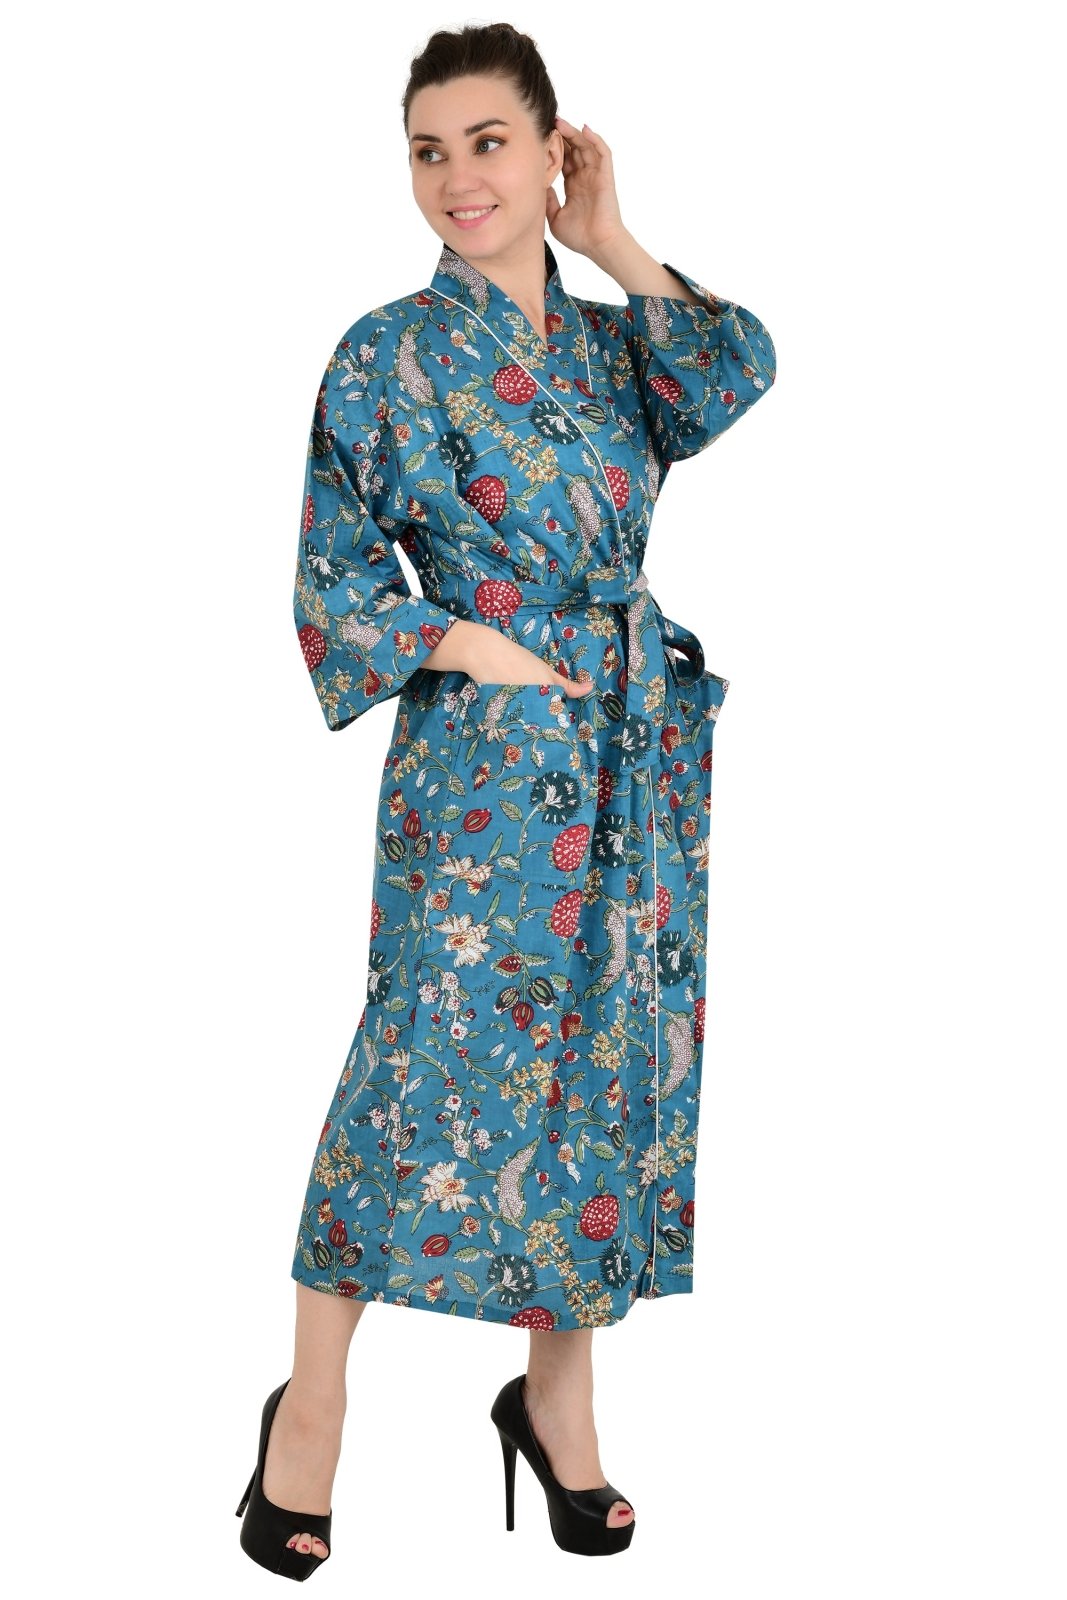 Boho Cotton Kimono House Robe Indian Handprinted Floral Rose | Lightweight Summer Luxury Beach Holidays Yacht Cover Up Stunning Dress - The Eastern Loom